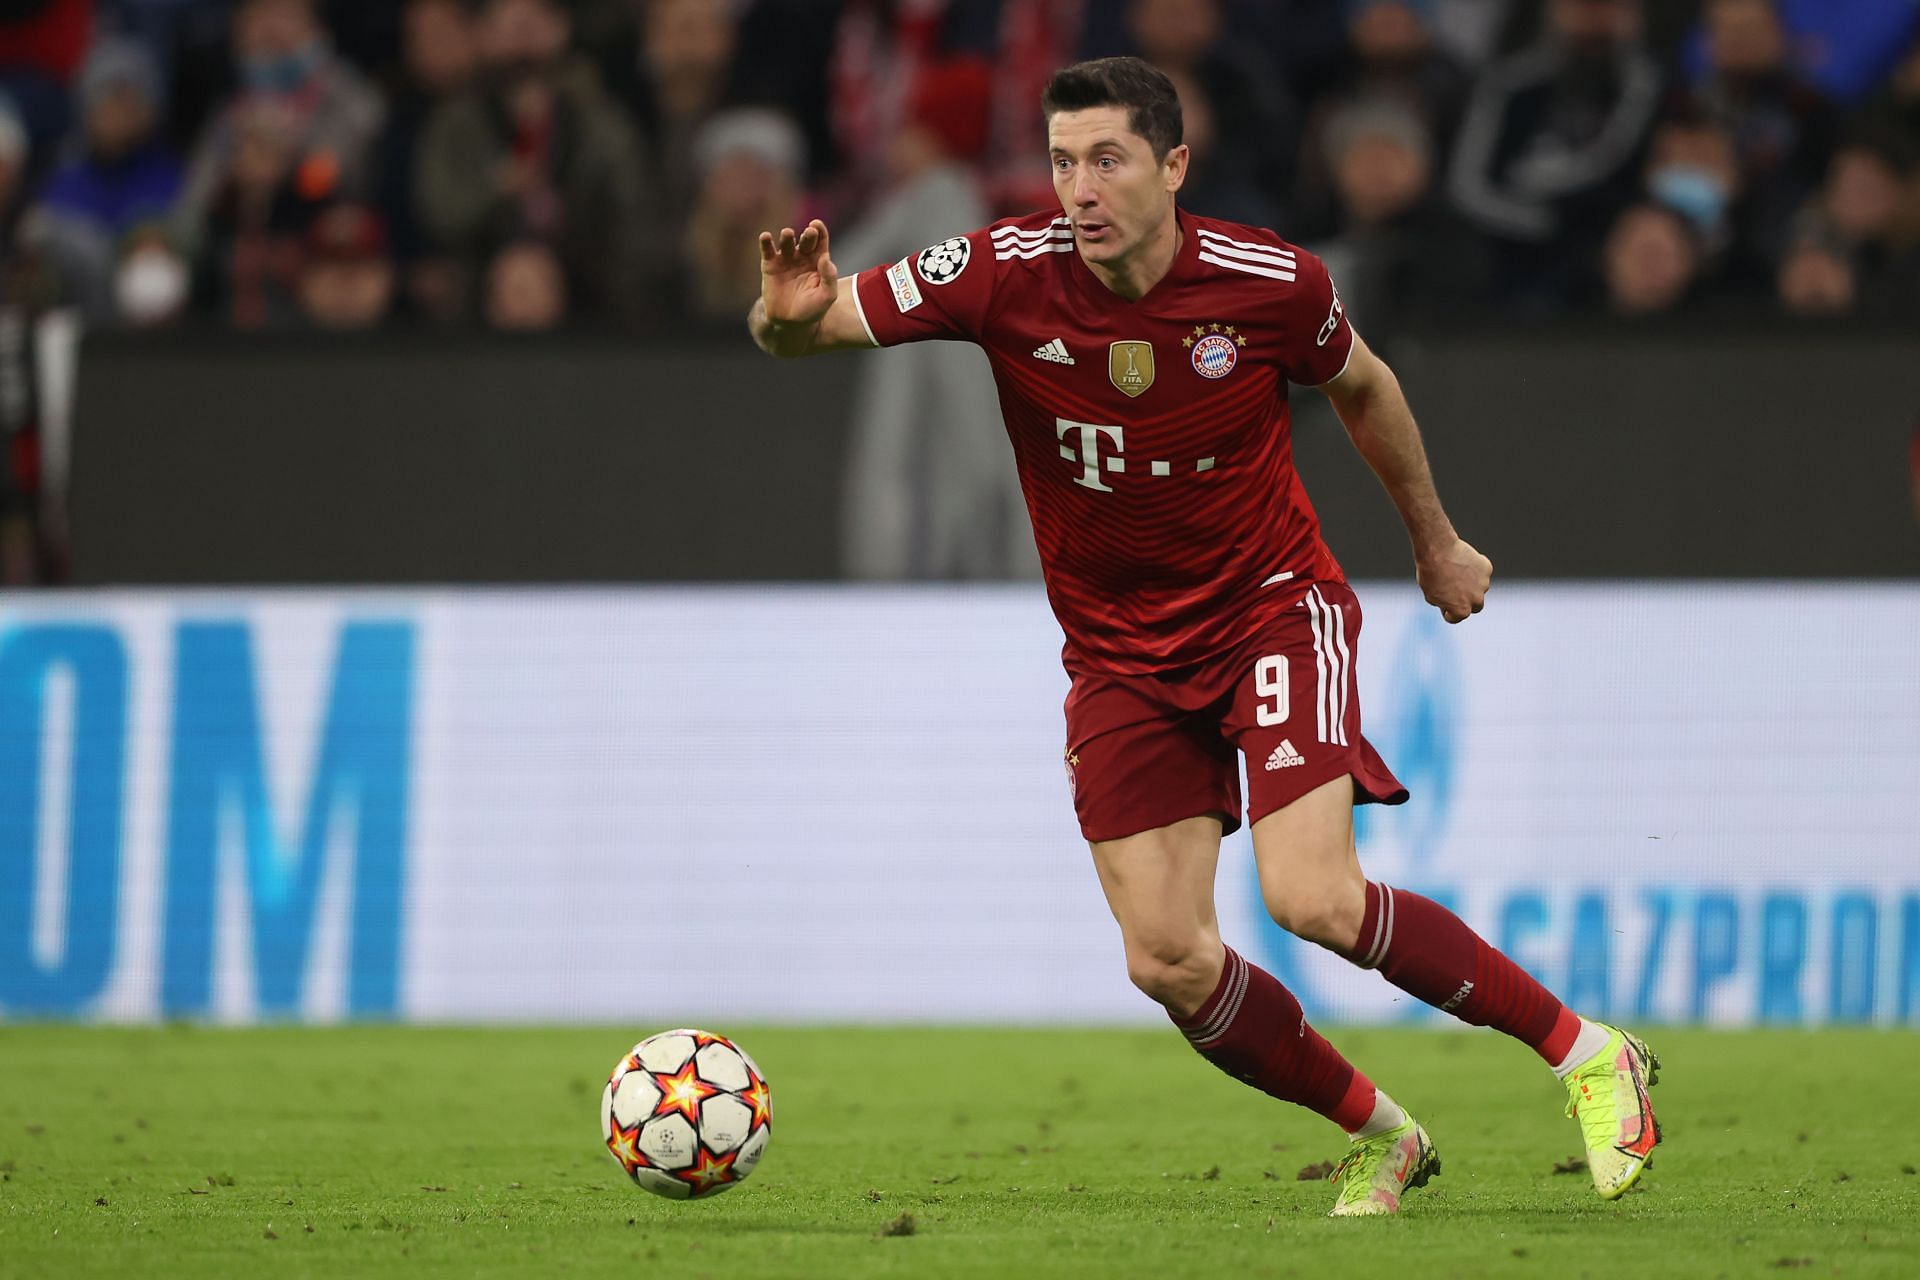 Robert Lewandowski is all set for another goal-rich campaign.